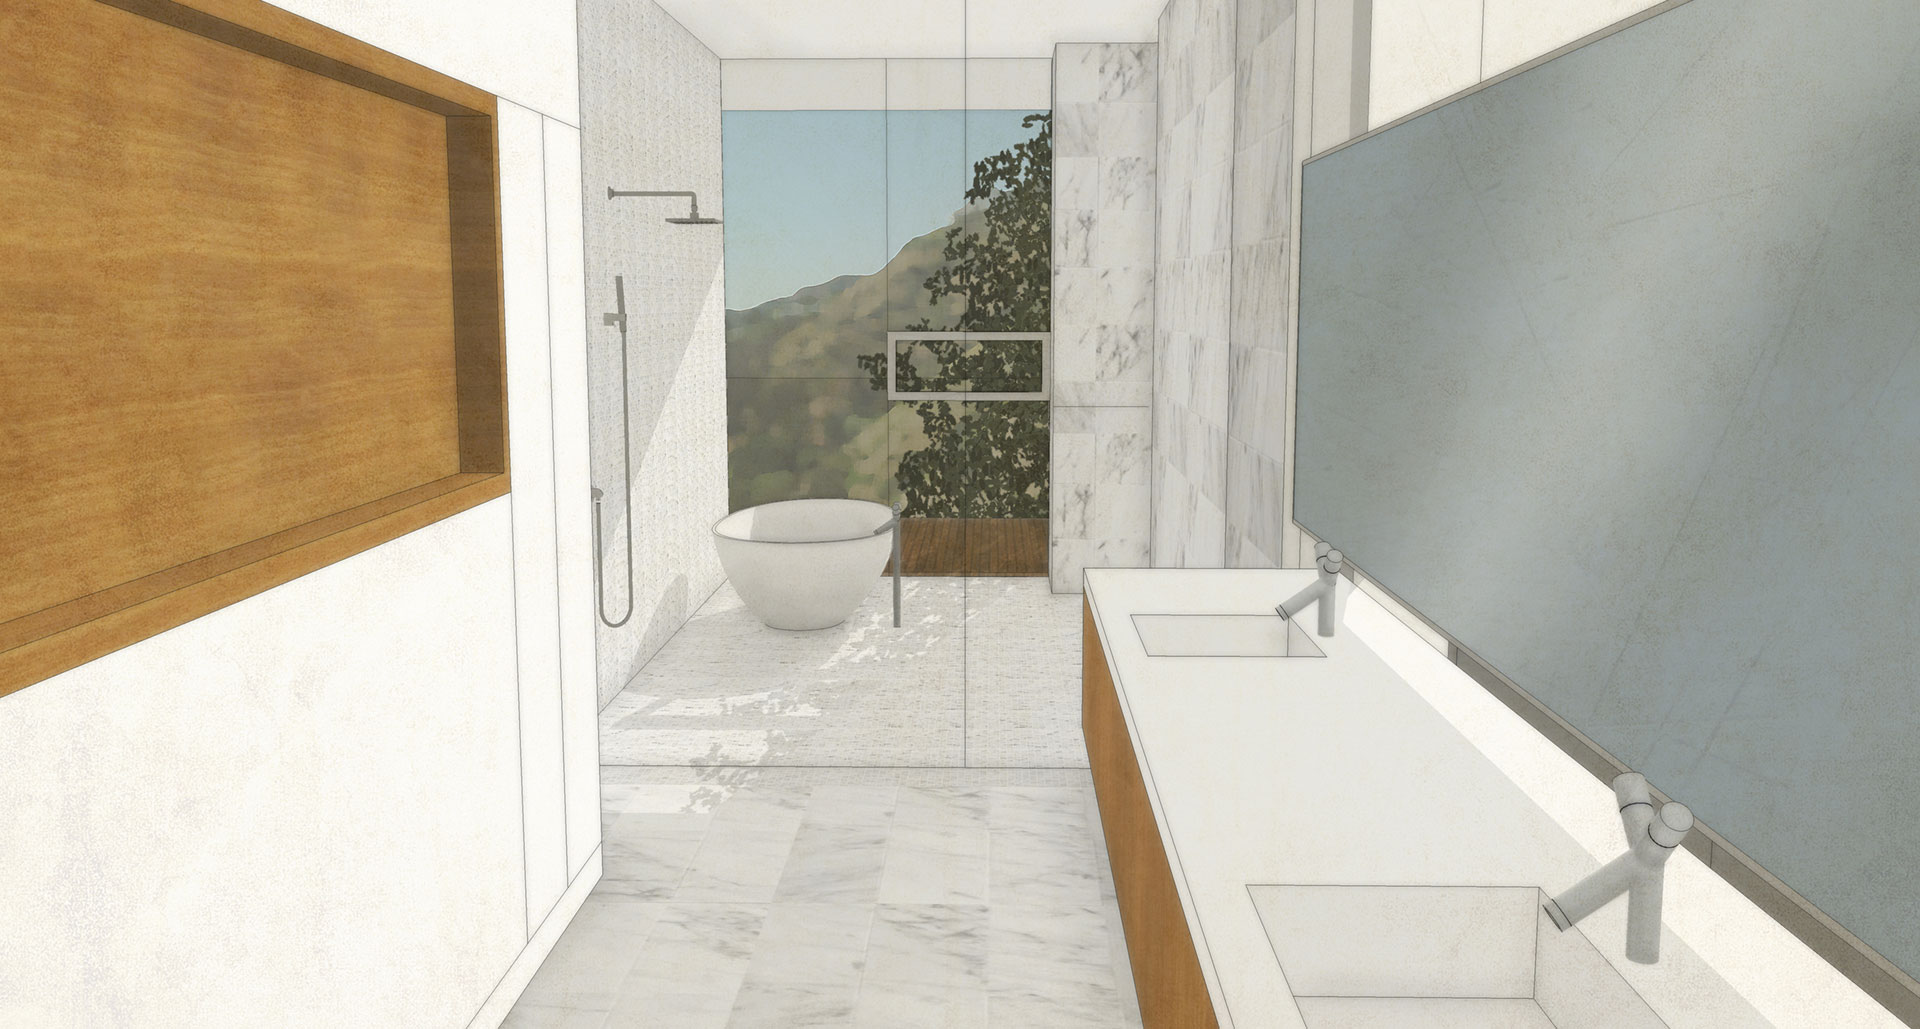 A rendered view of the master bathroom.